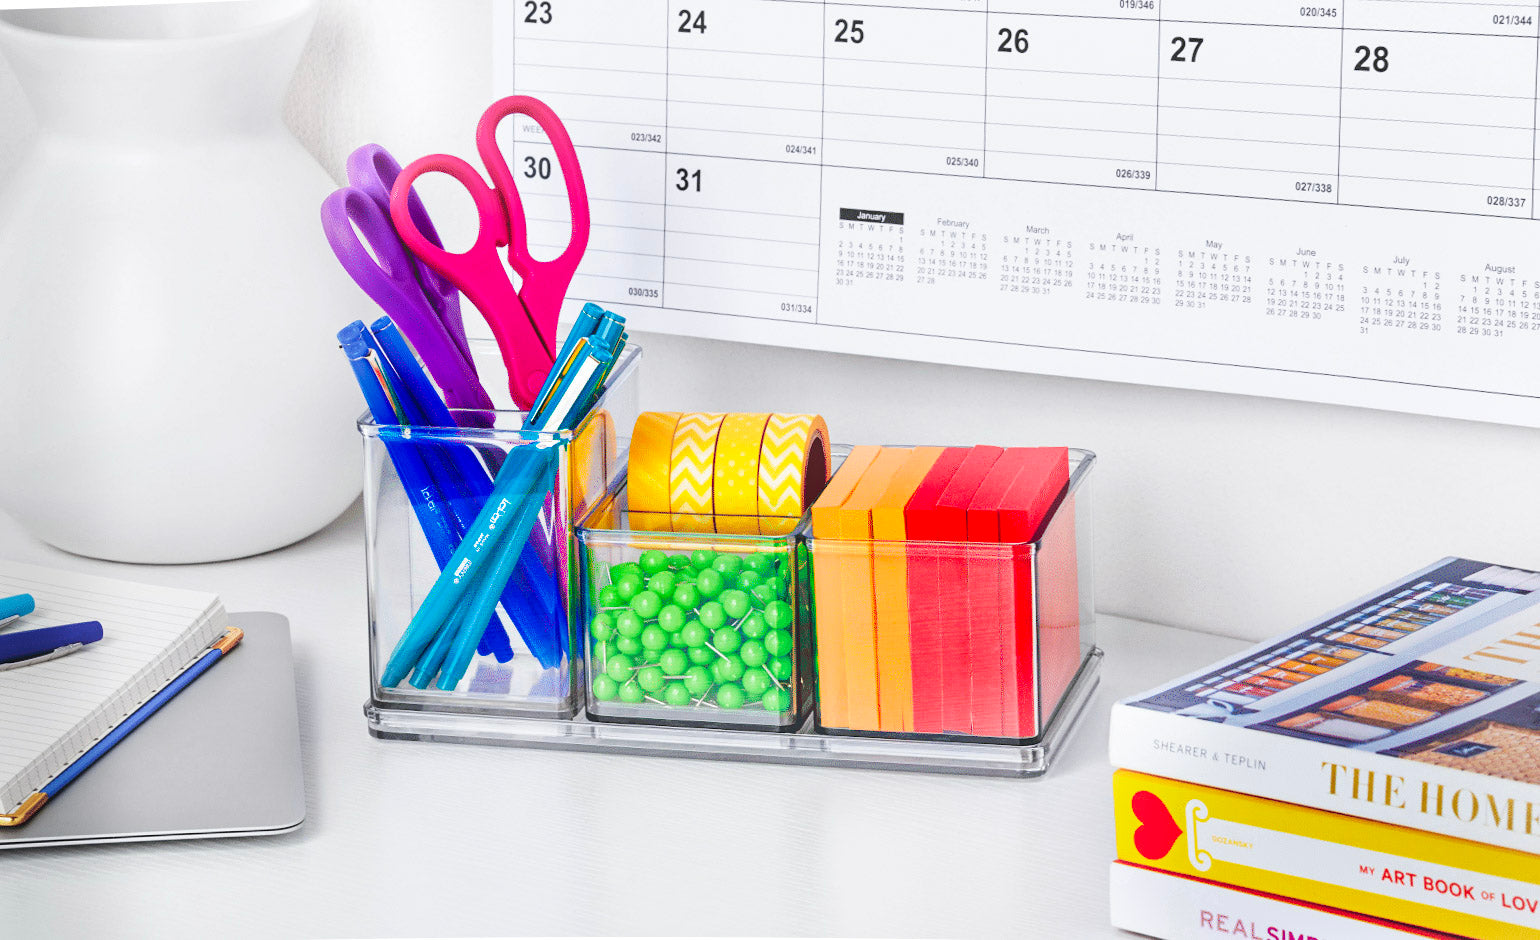 20 Cute Office Desk Accessories to Brighten Up Your Workspace